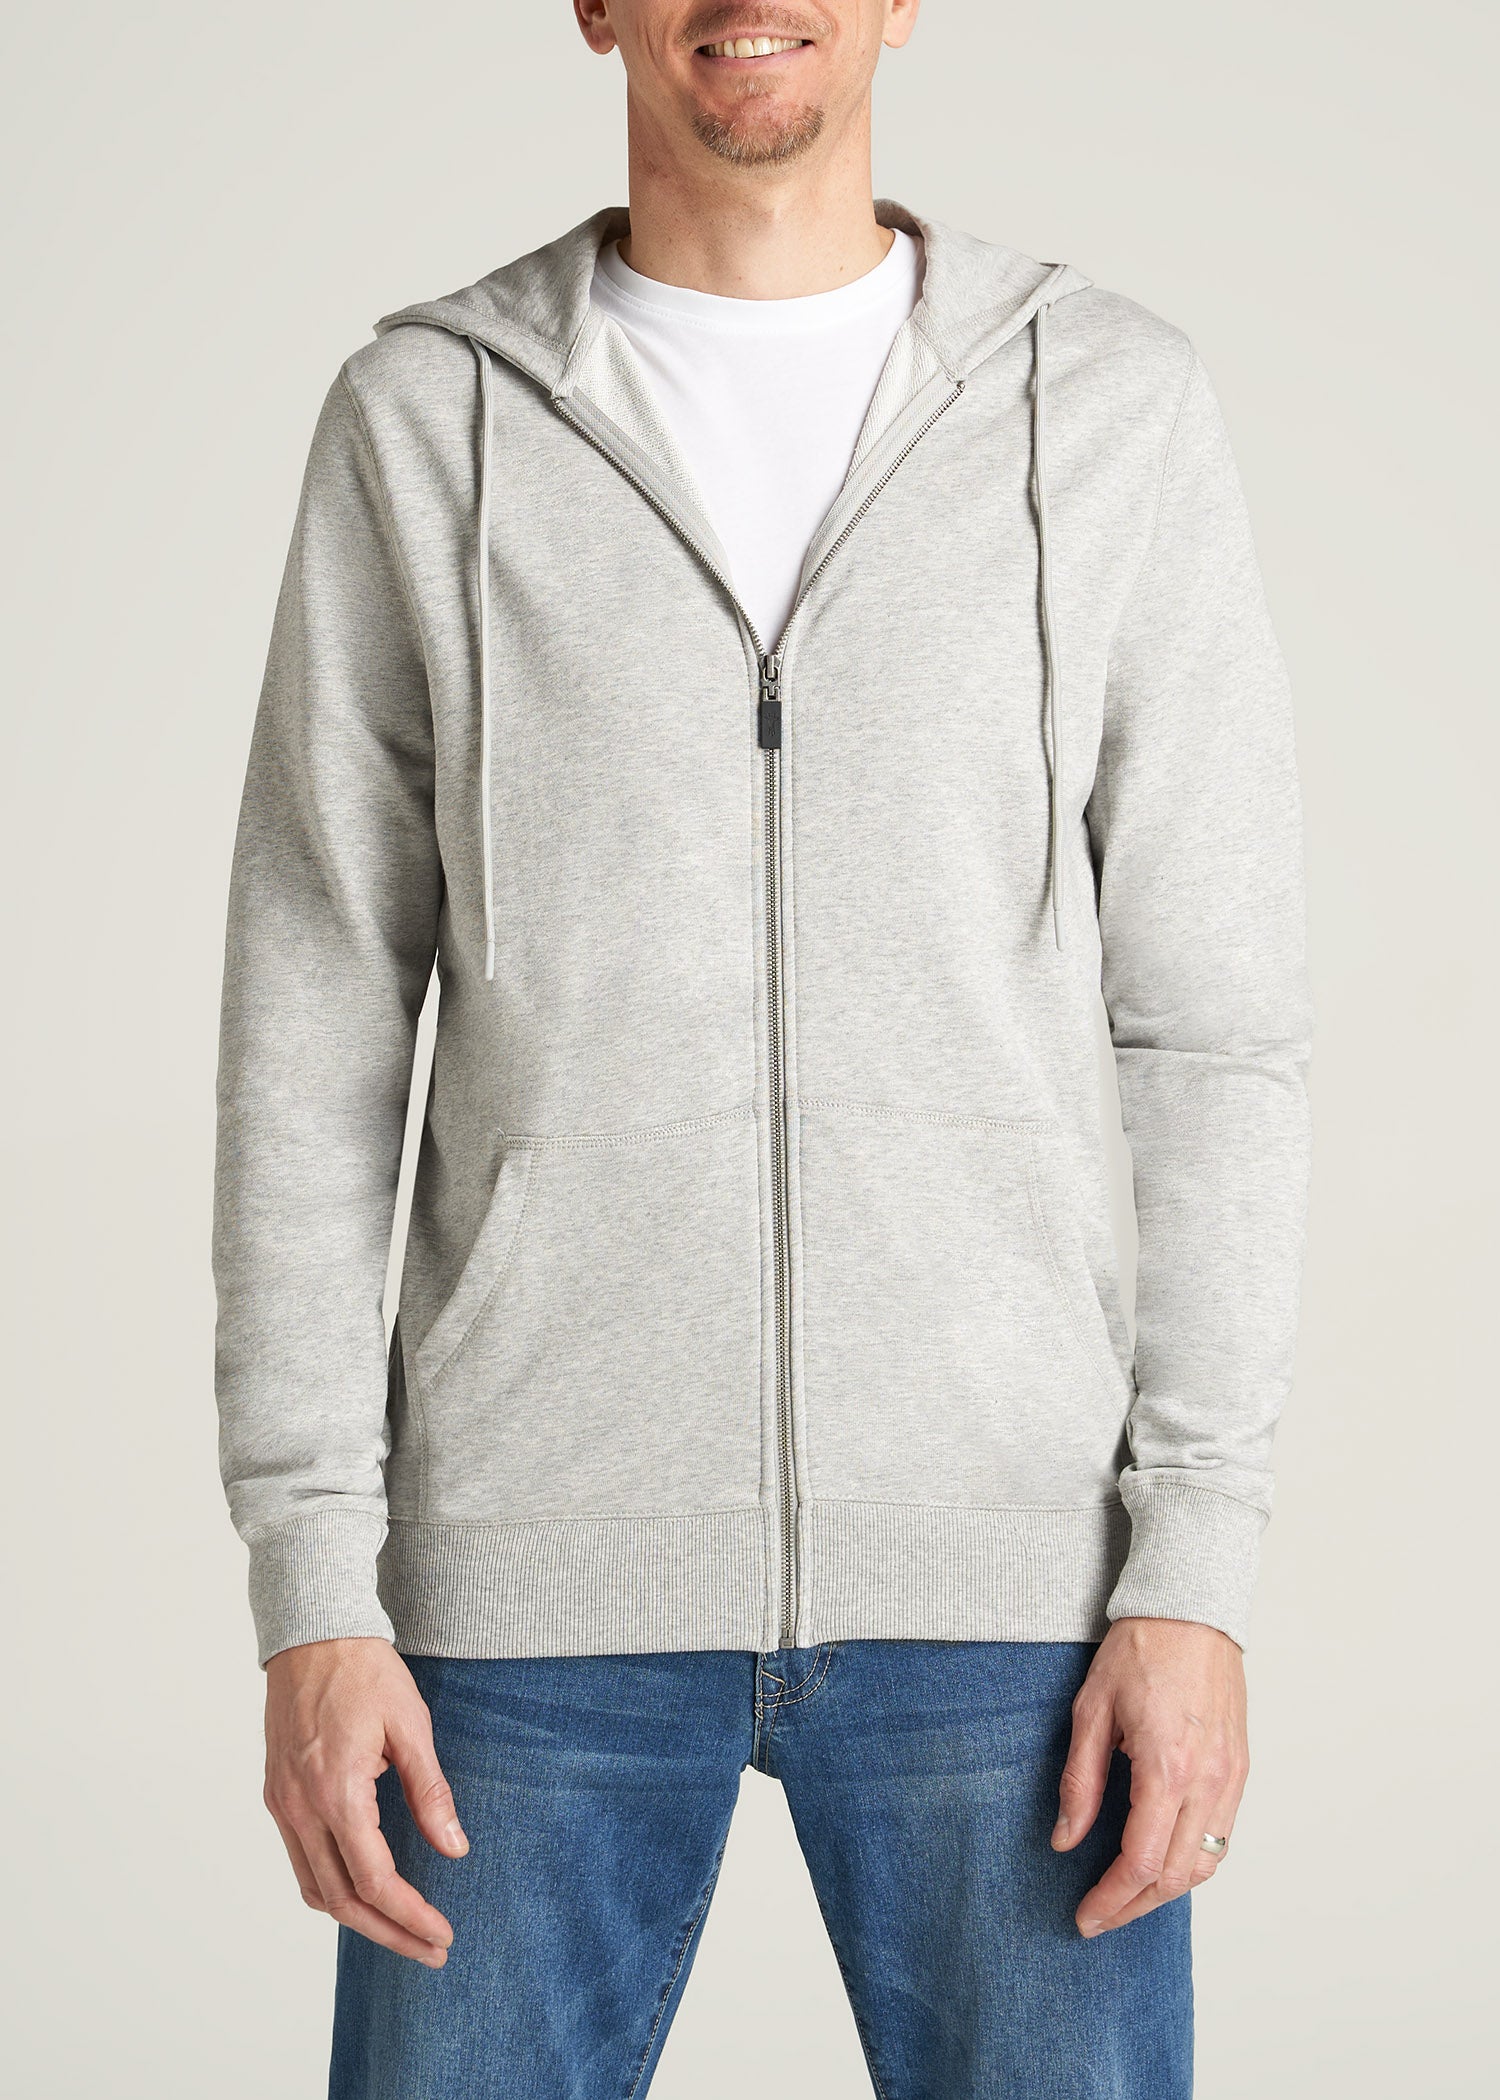 Wearever French Terry Full-Zip Men's Tall Hoodie in Grey Mix XL / Tall / Grey Mix